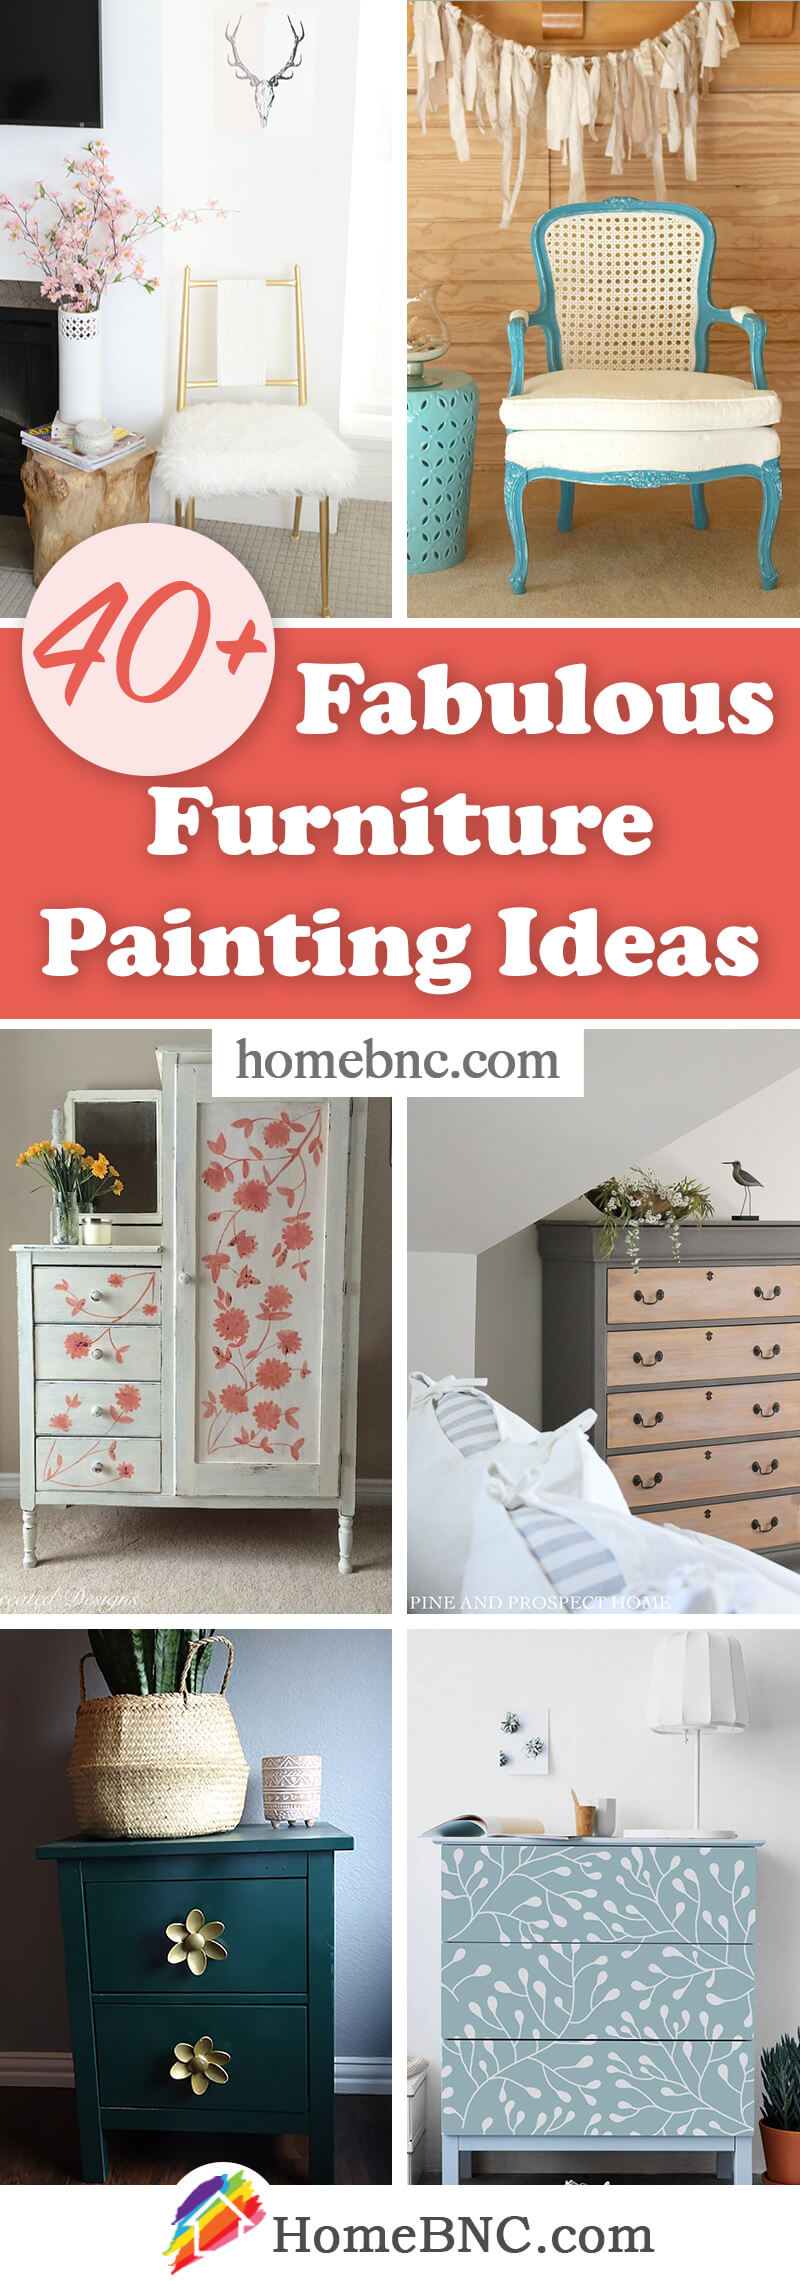 Furniture Painting Projects